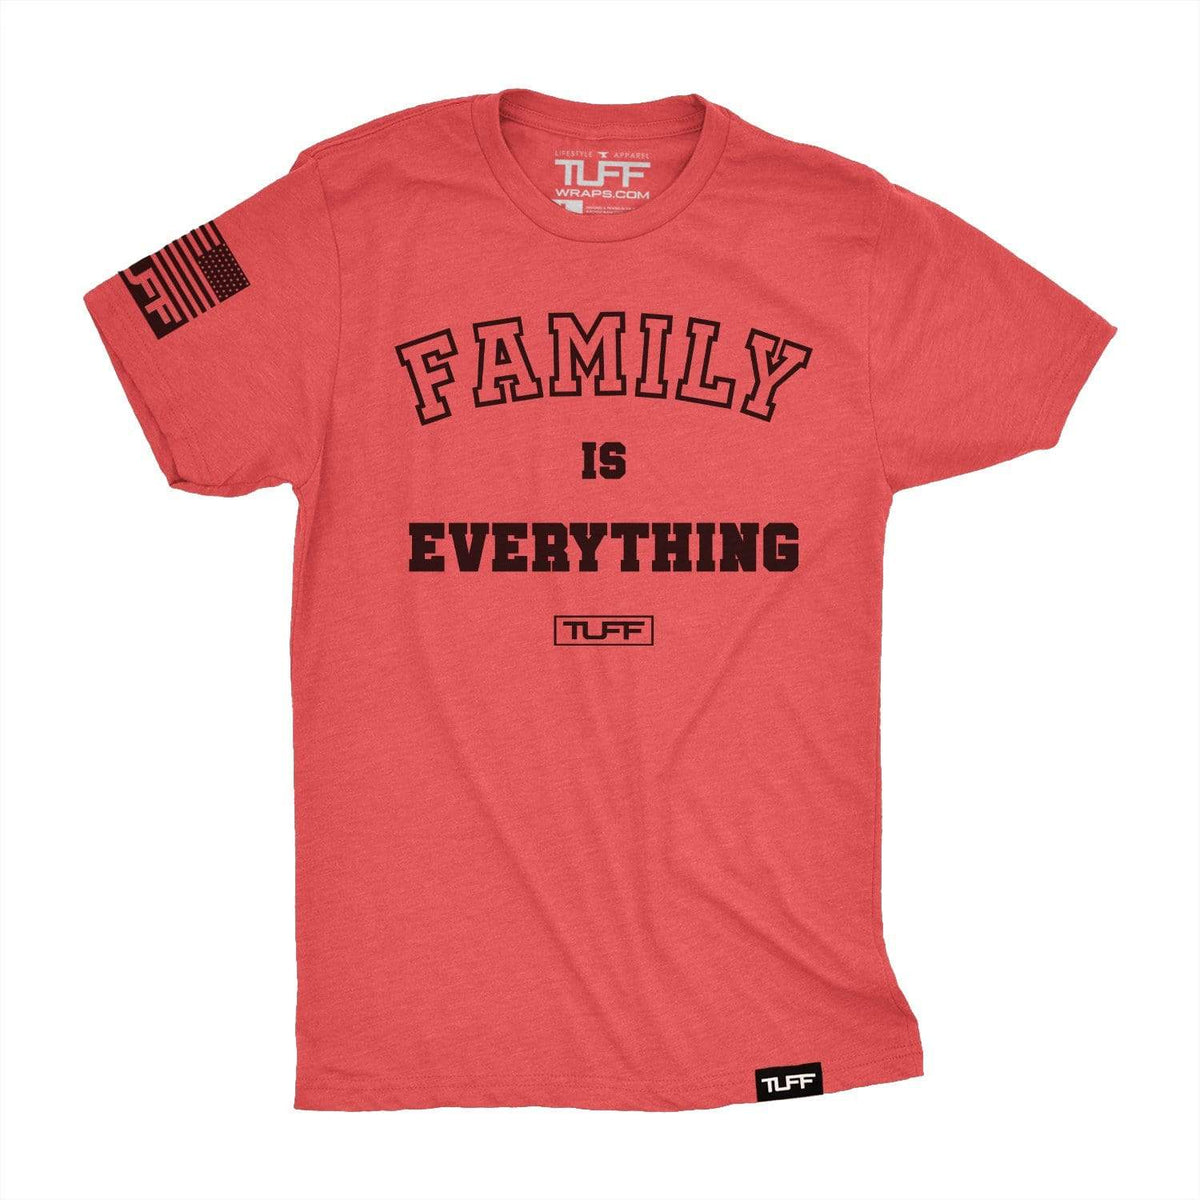 Family Is Everything Tee S / Vintage Red TuffWraps.com